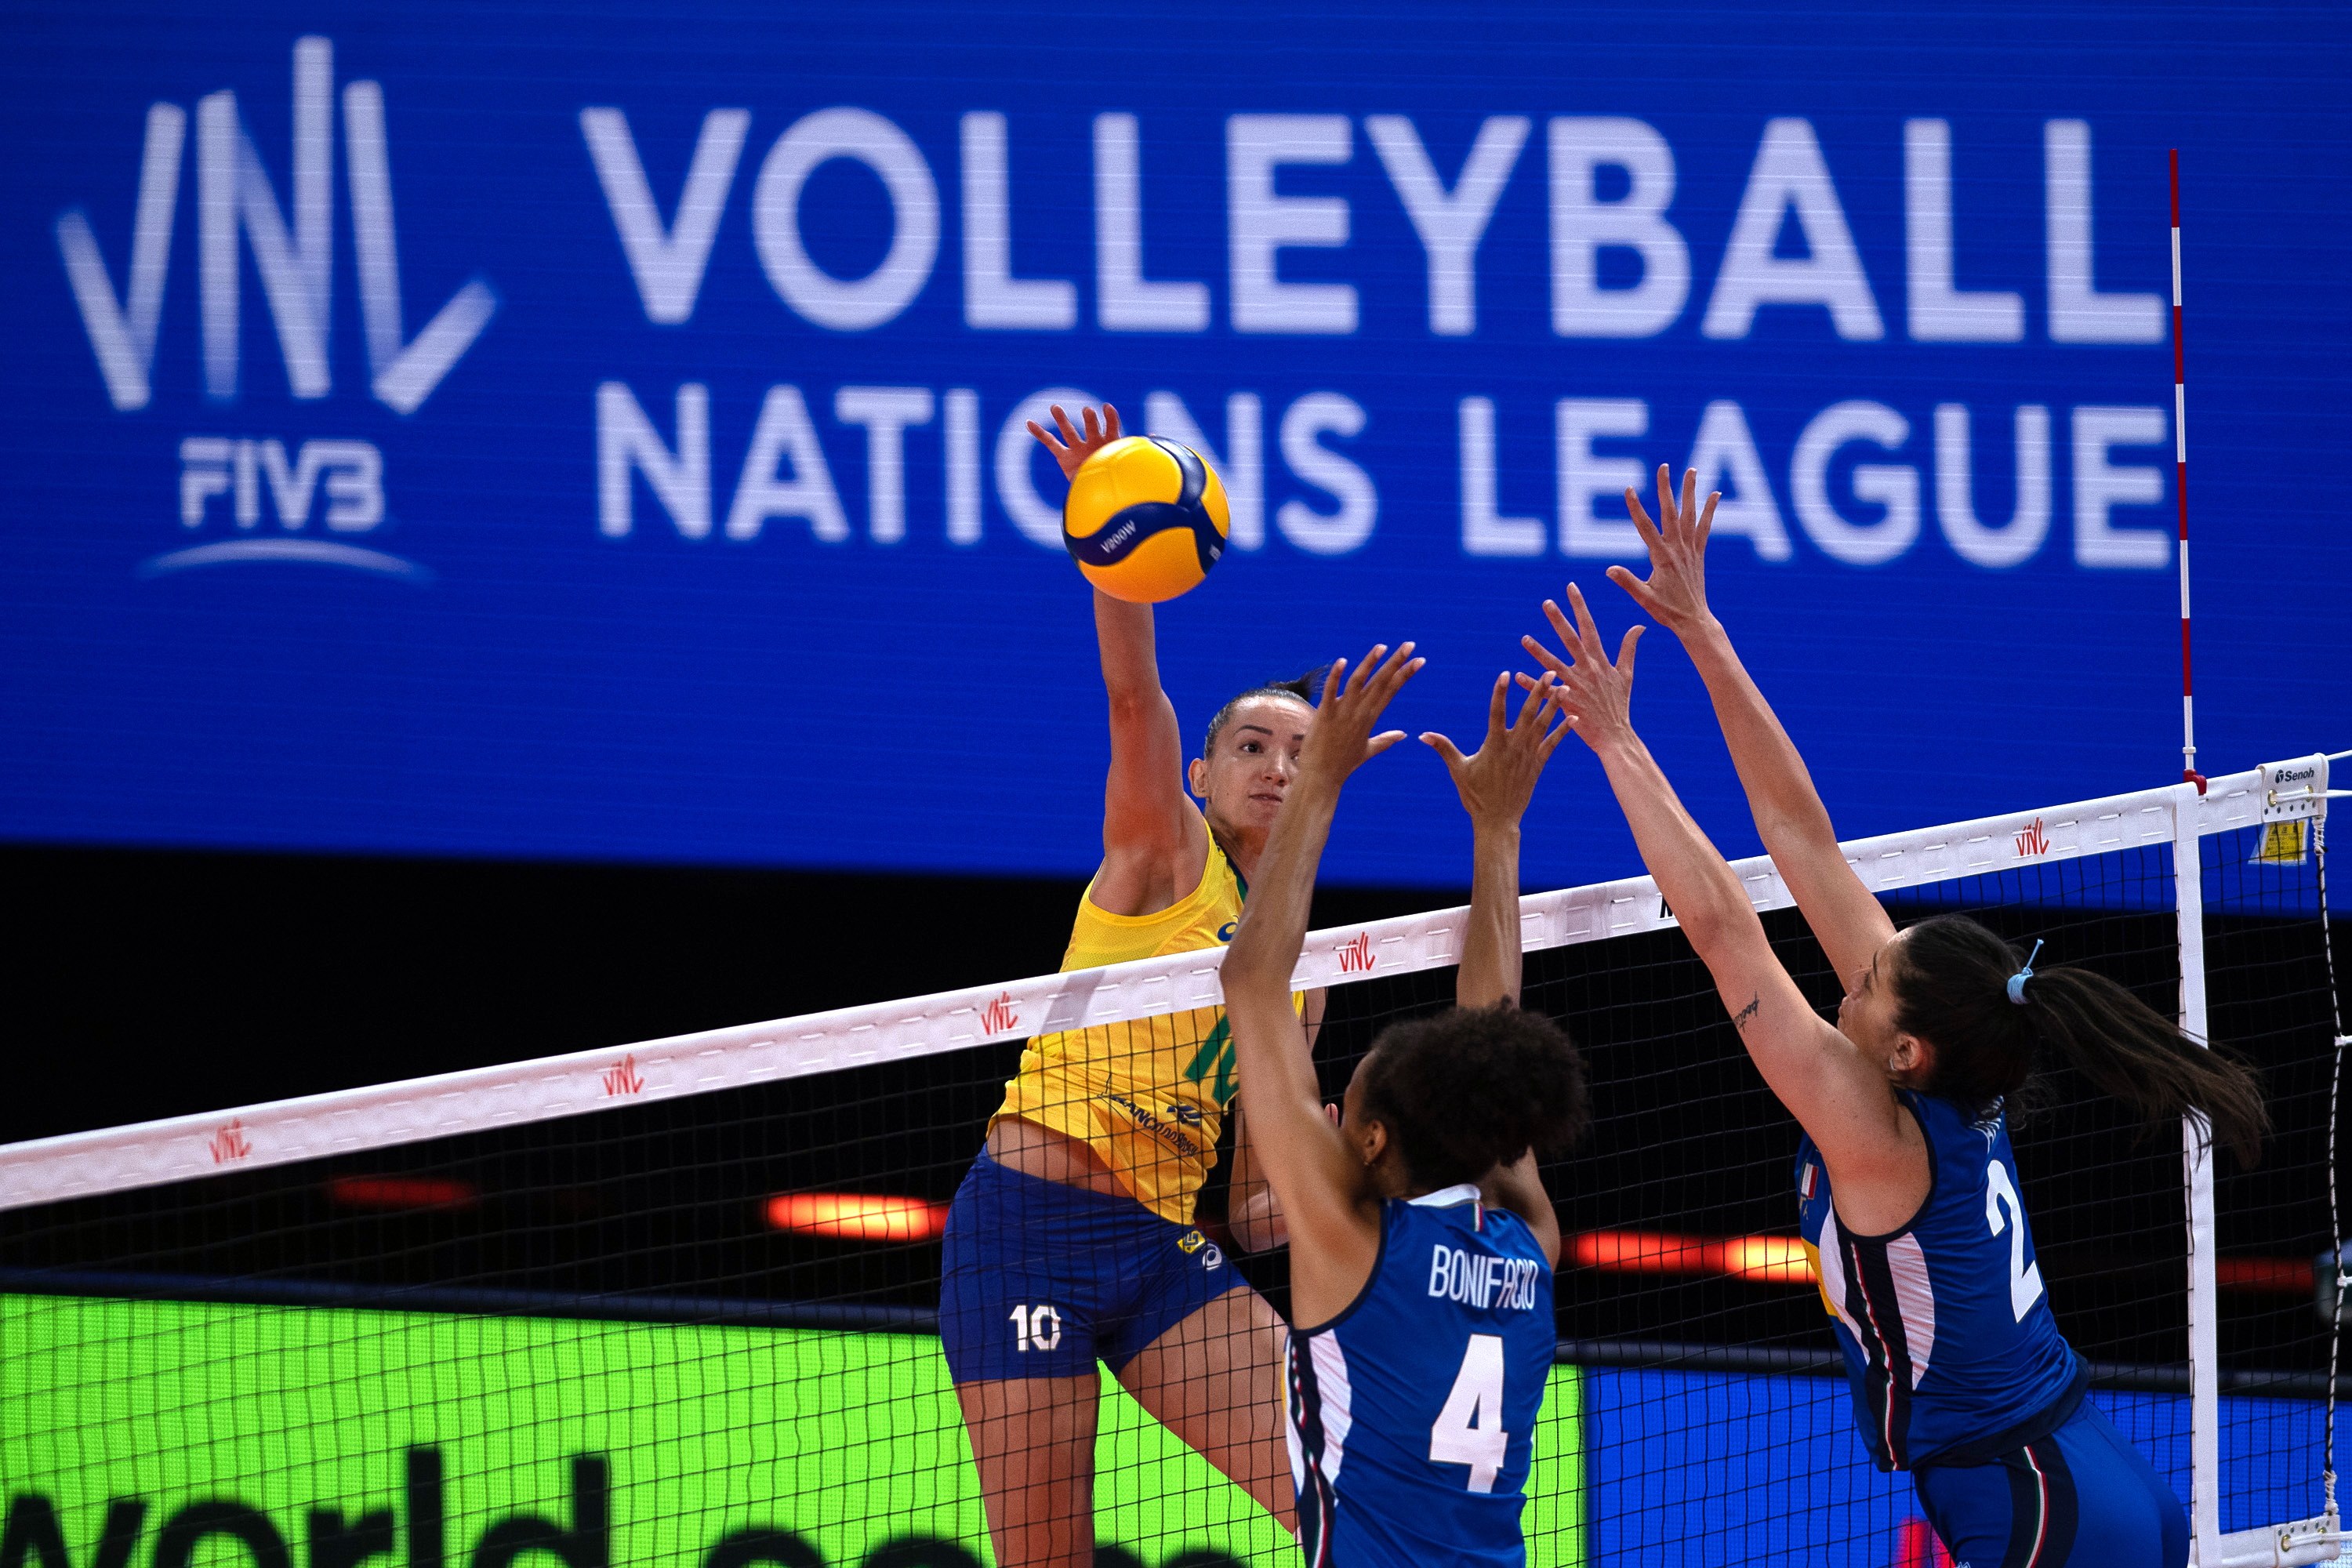 Italy v Brazil Continental champs of Europe and South America collide volleyballworld